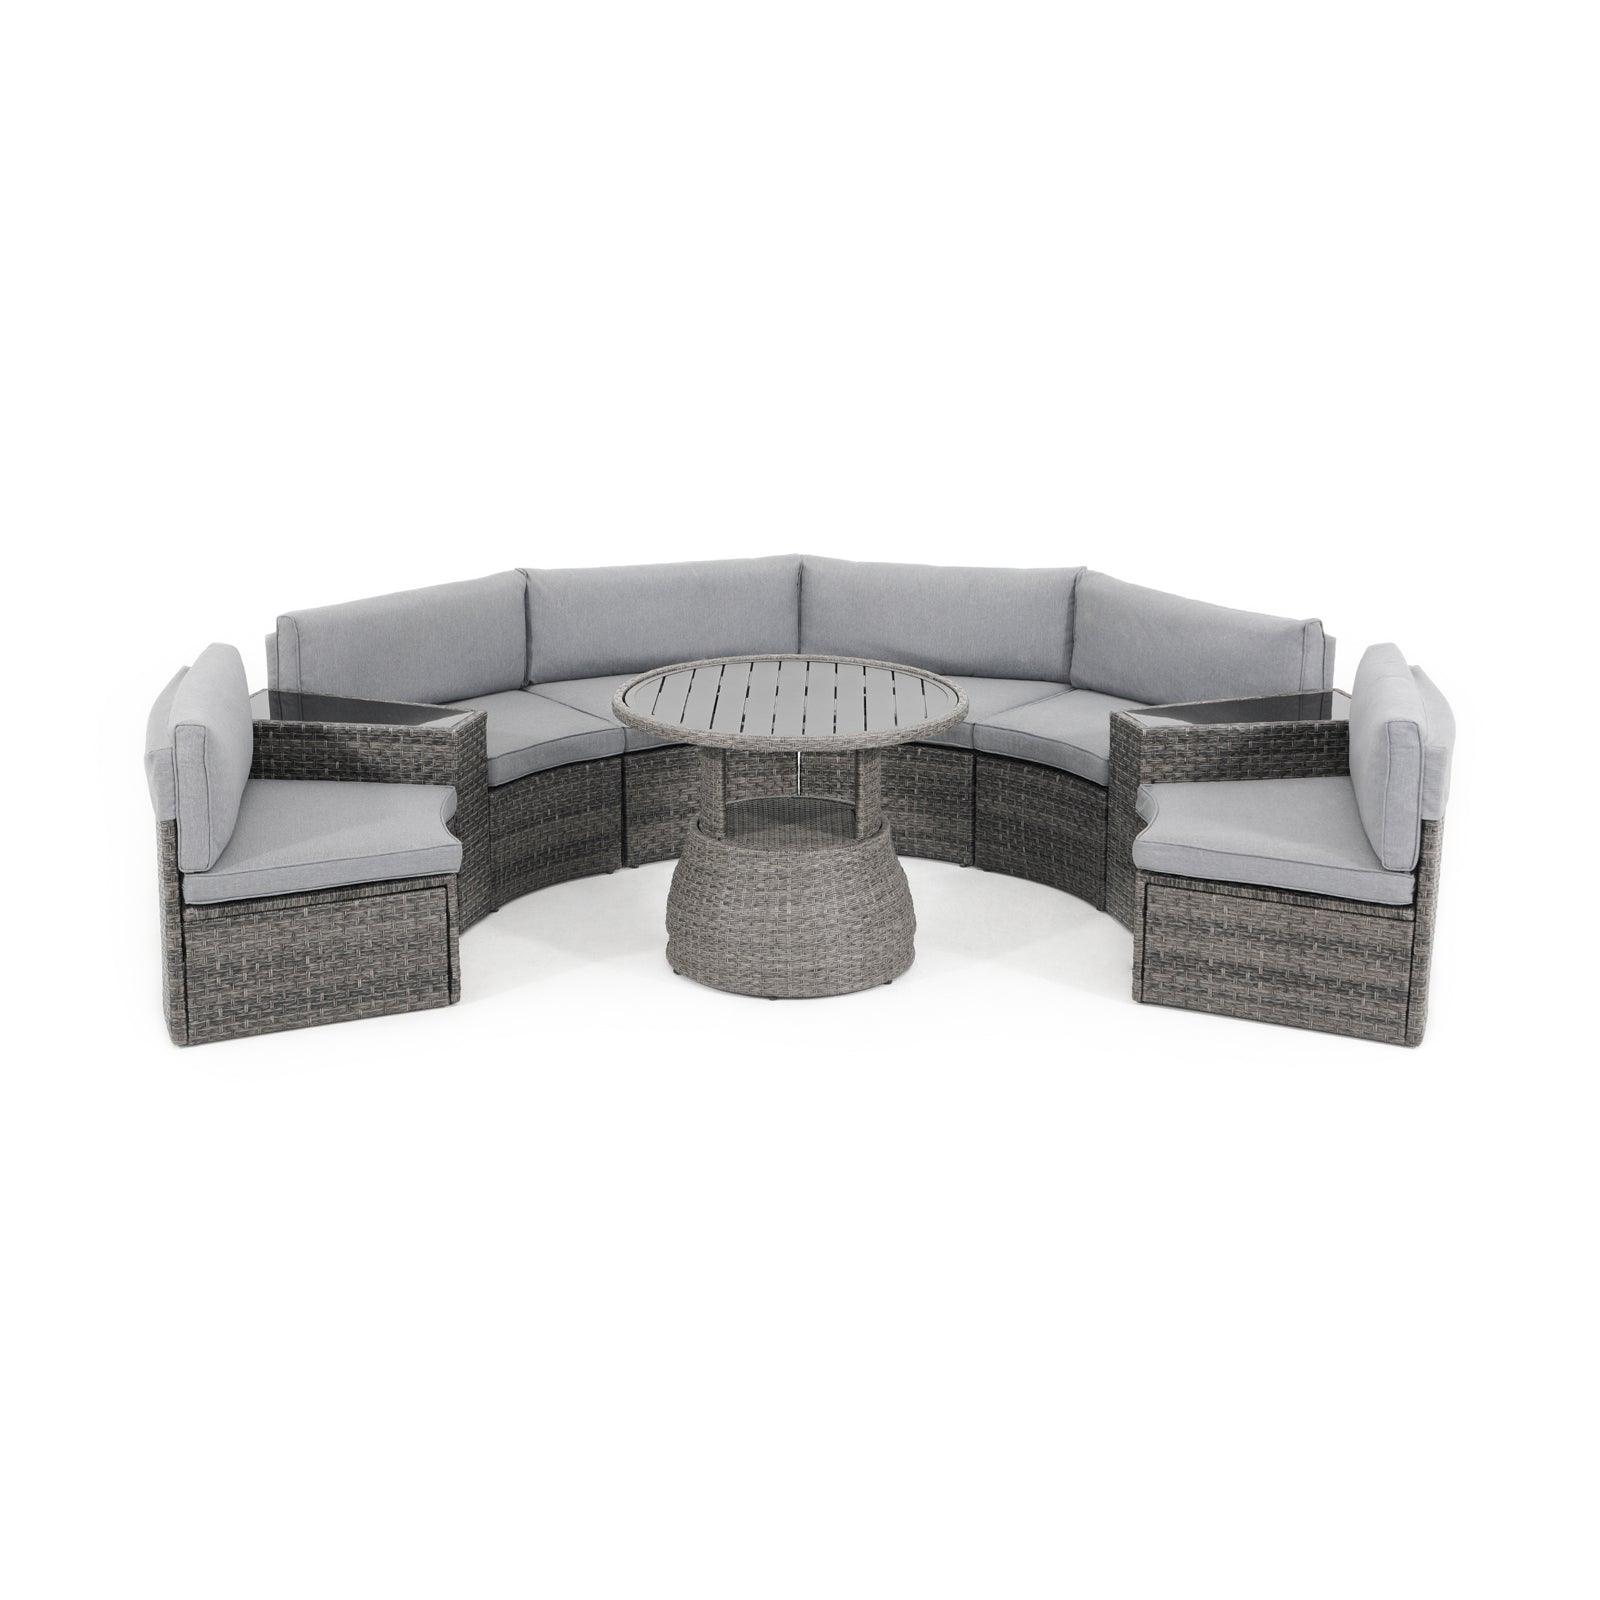 Boboli 6-seater Grey Outdoor Wicker Curved Sectional sofas with grey cushions + 2 wicker side tables + 1 Lift-top round table, front view - Jardina Furniture#color_Grey#piece_9-pc.